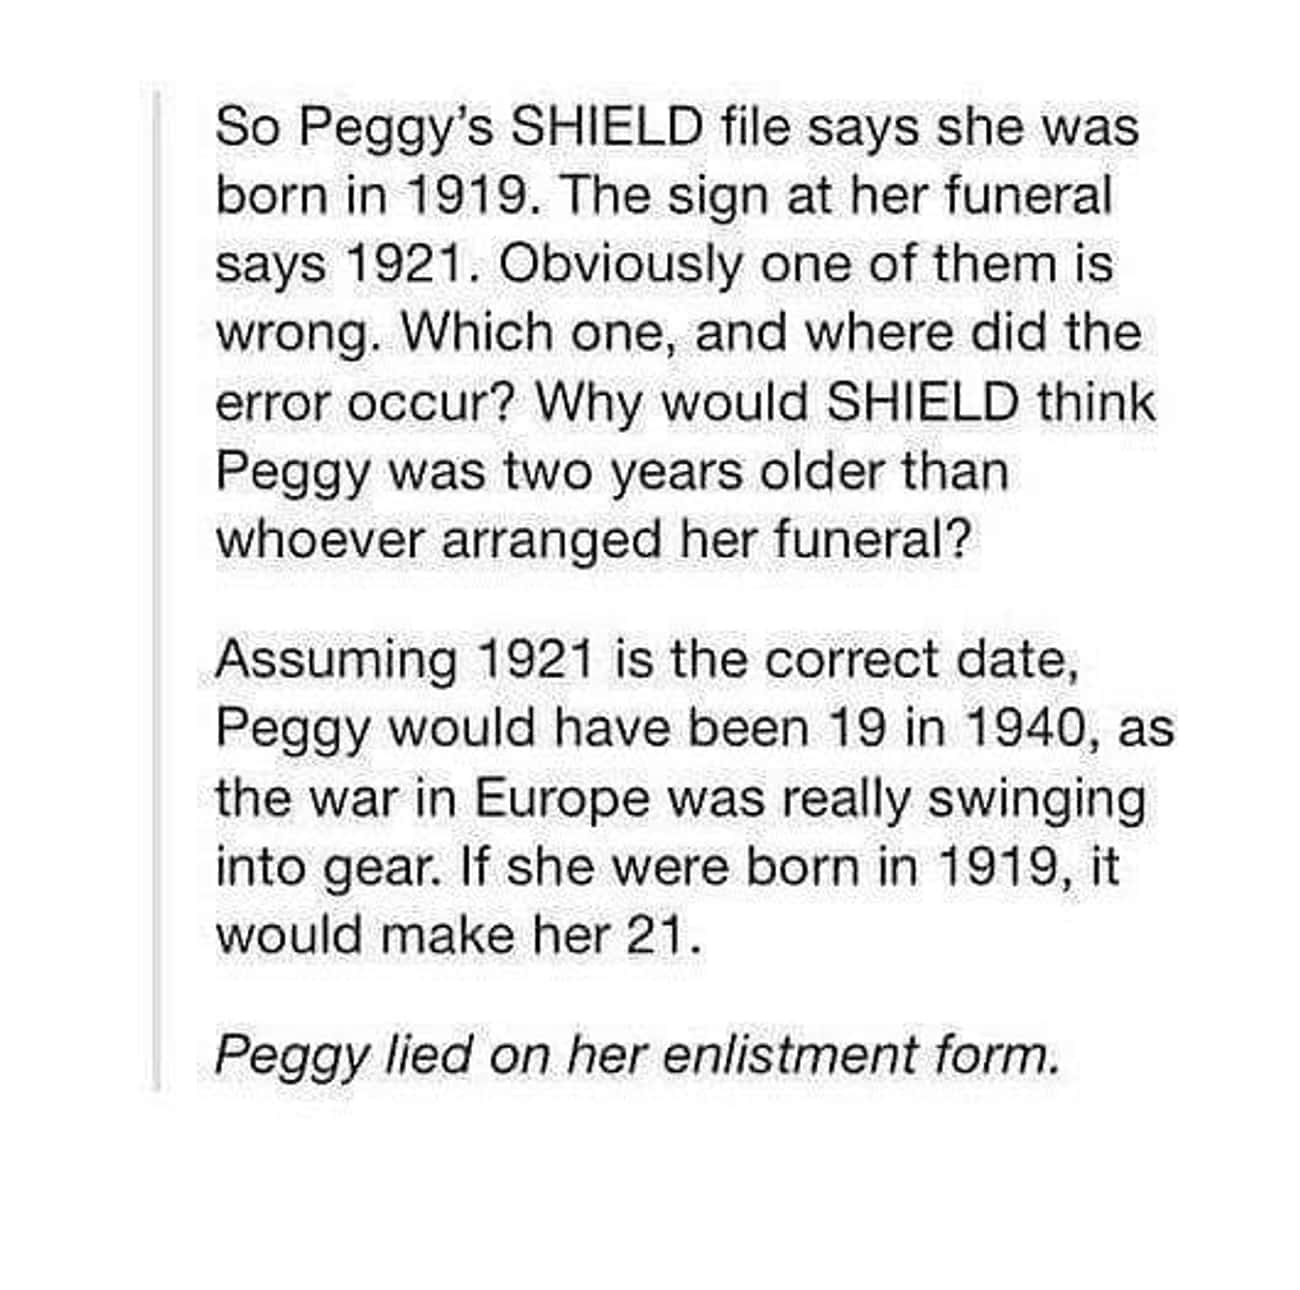 Peggy lied on her enlistment form in Marvel!